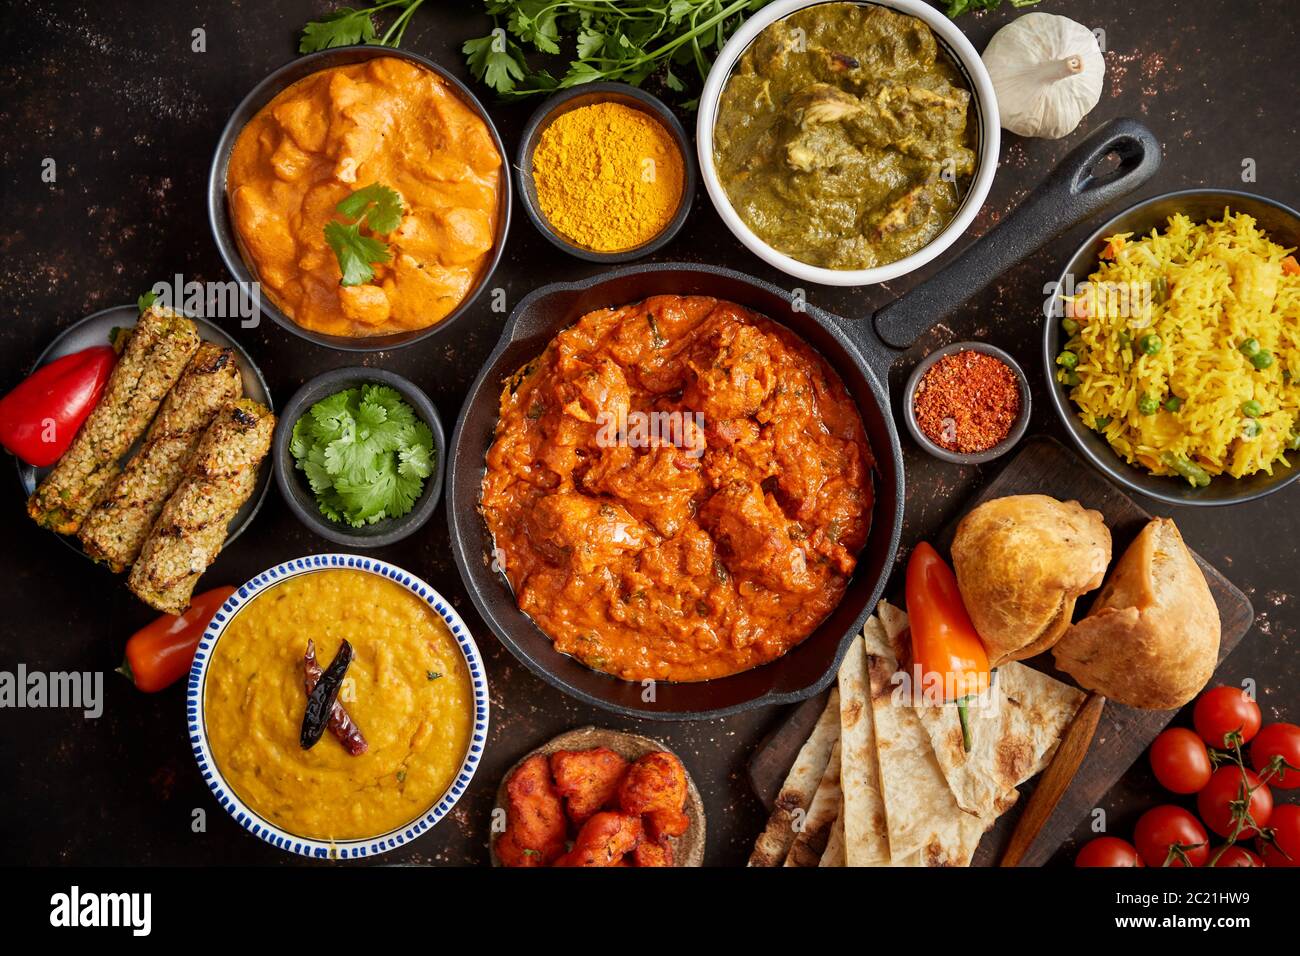 Assortment of various kinds of Indian cousine on dark rusty table Stock Photo